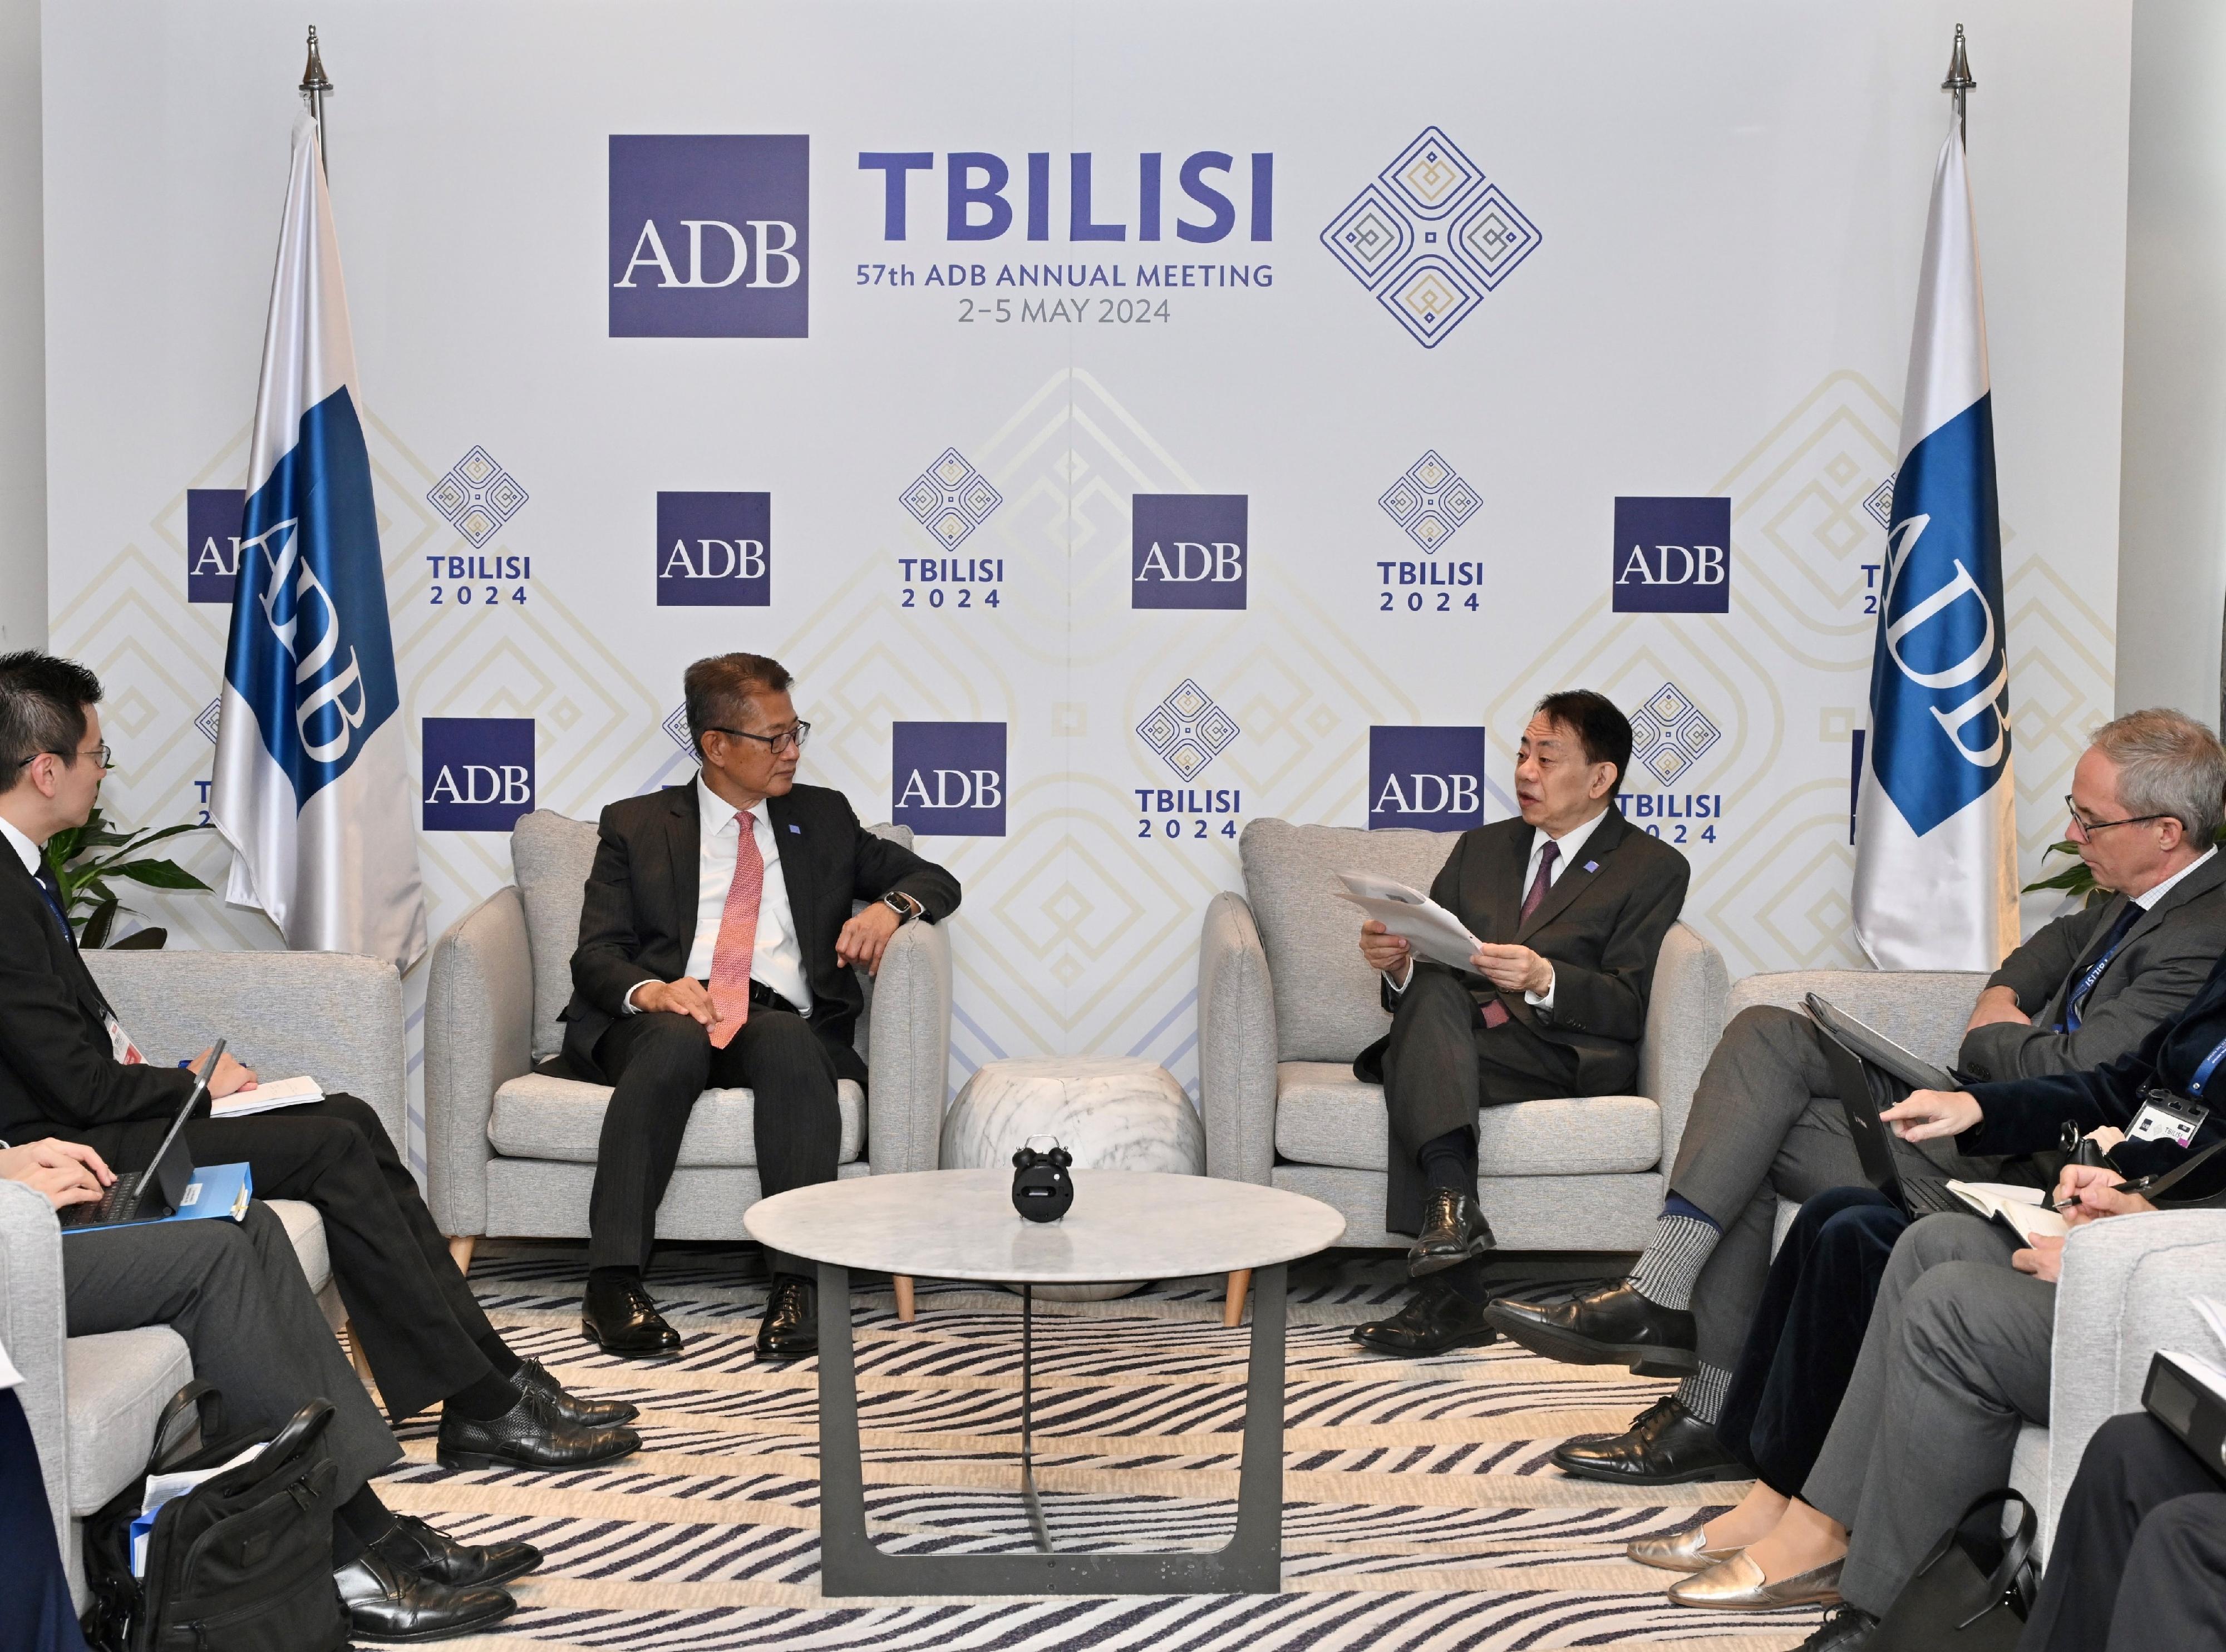 The Financial Secretary, Mr Paul Chan, yesterday (May 2, Tbilisi time) began his visit to Tbilisi, Georgia. Photo shows Mr Chan (second left) meeting with the President of the Asian Development Bank, Mr Masatsugu Asakawa (second right).